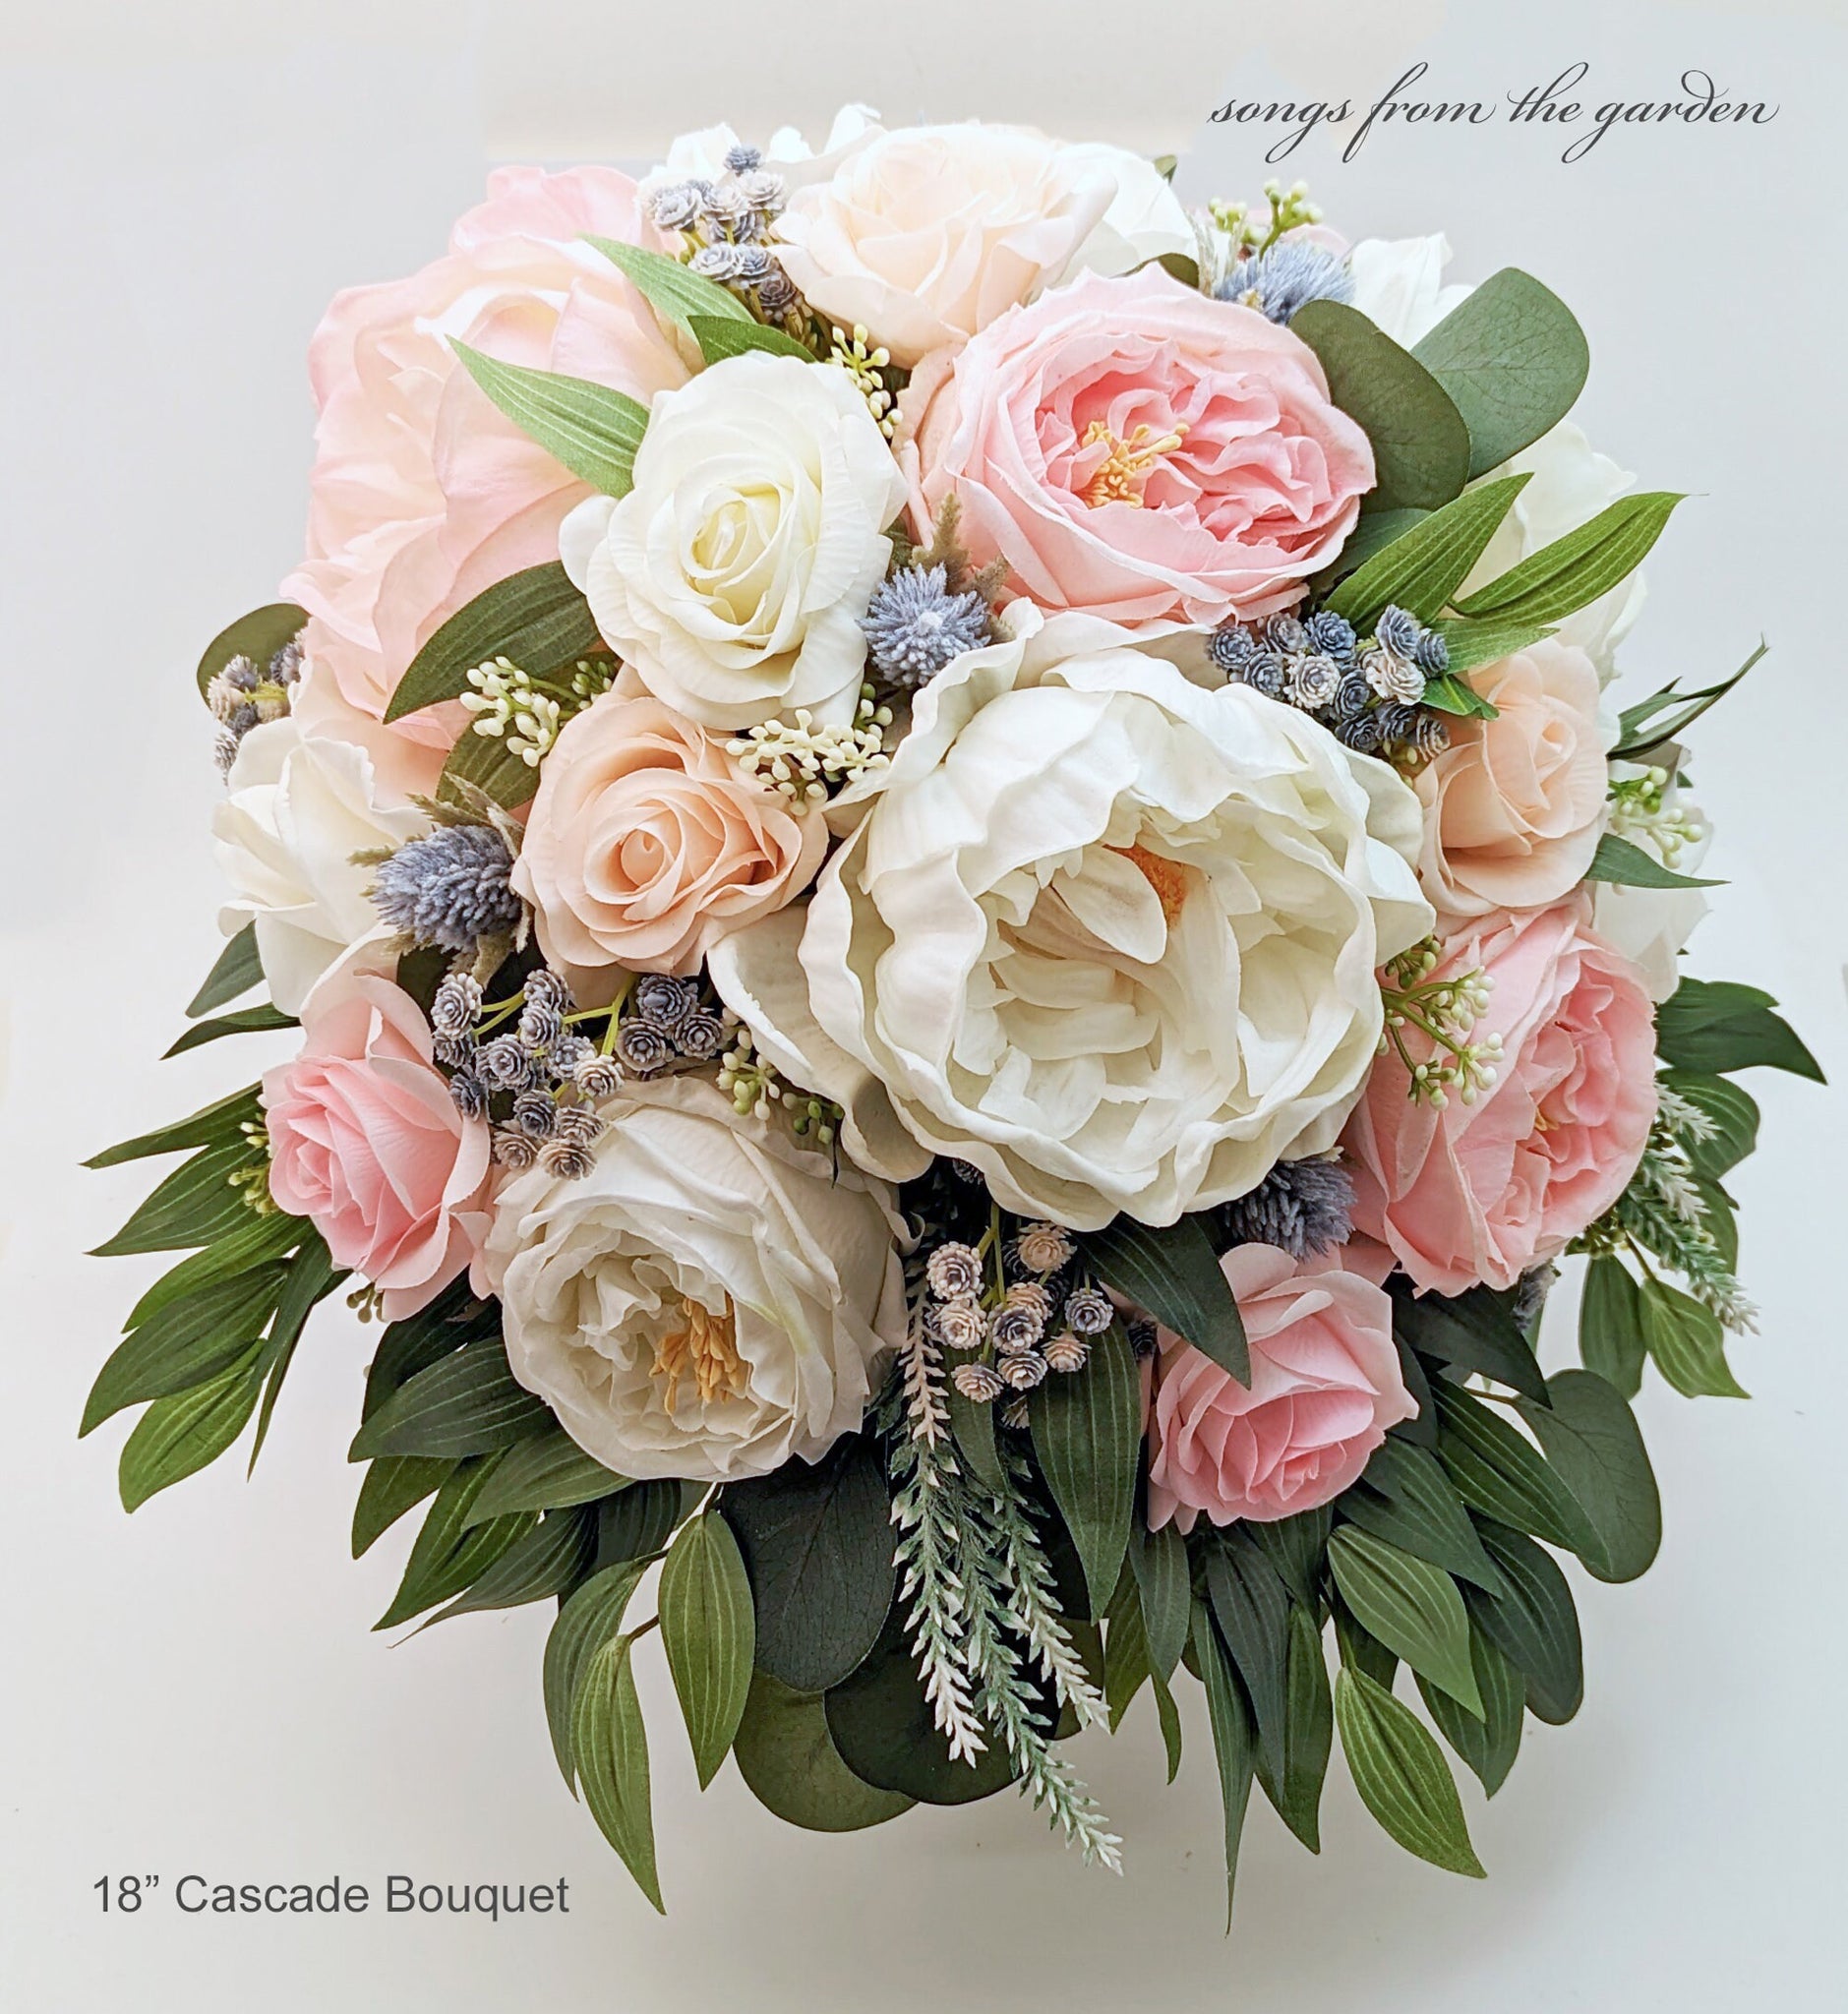 Cascade Bridal Bouquet Pink Peach Dusty Blue Real Touch Garden Roses Peonies Eucalyptus - Add Boutonniere Bridesmaid Corsage & More!